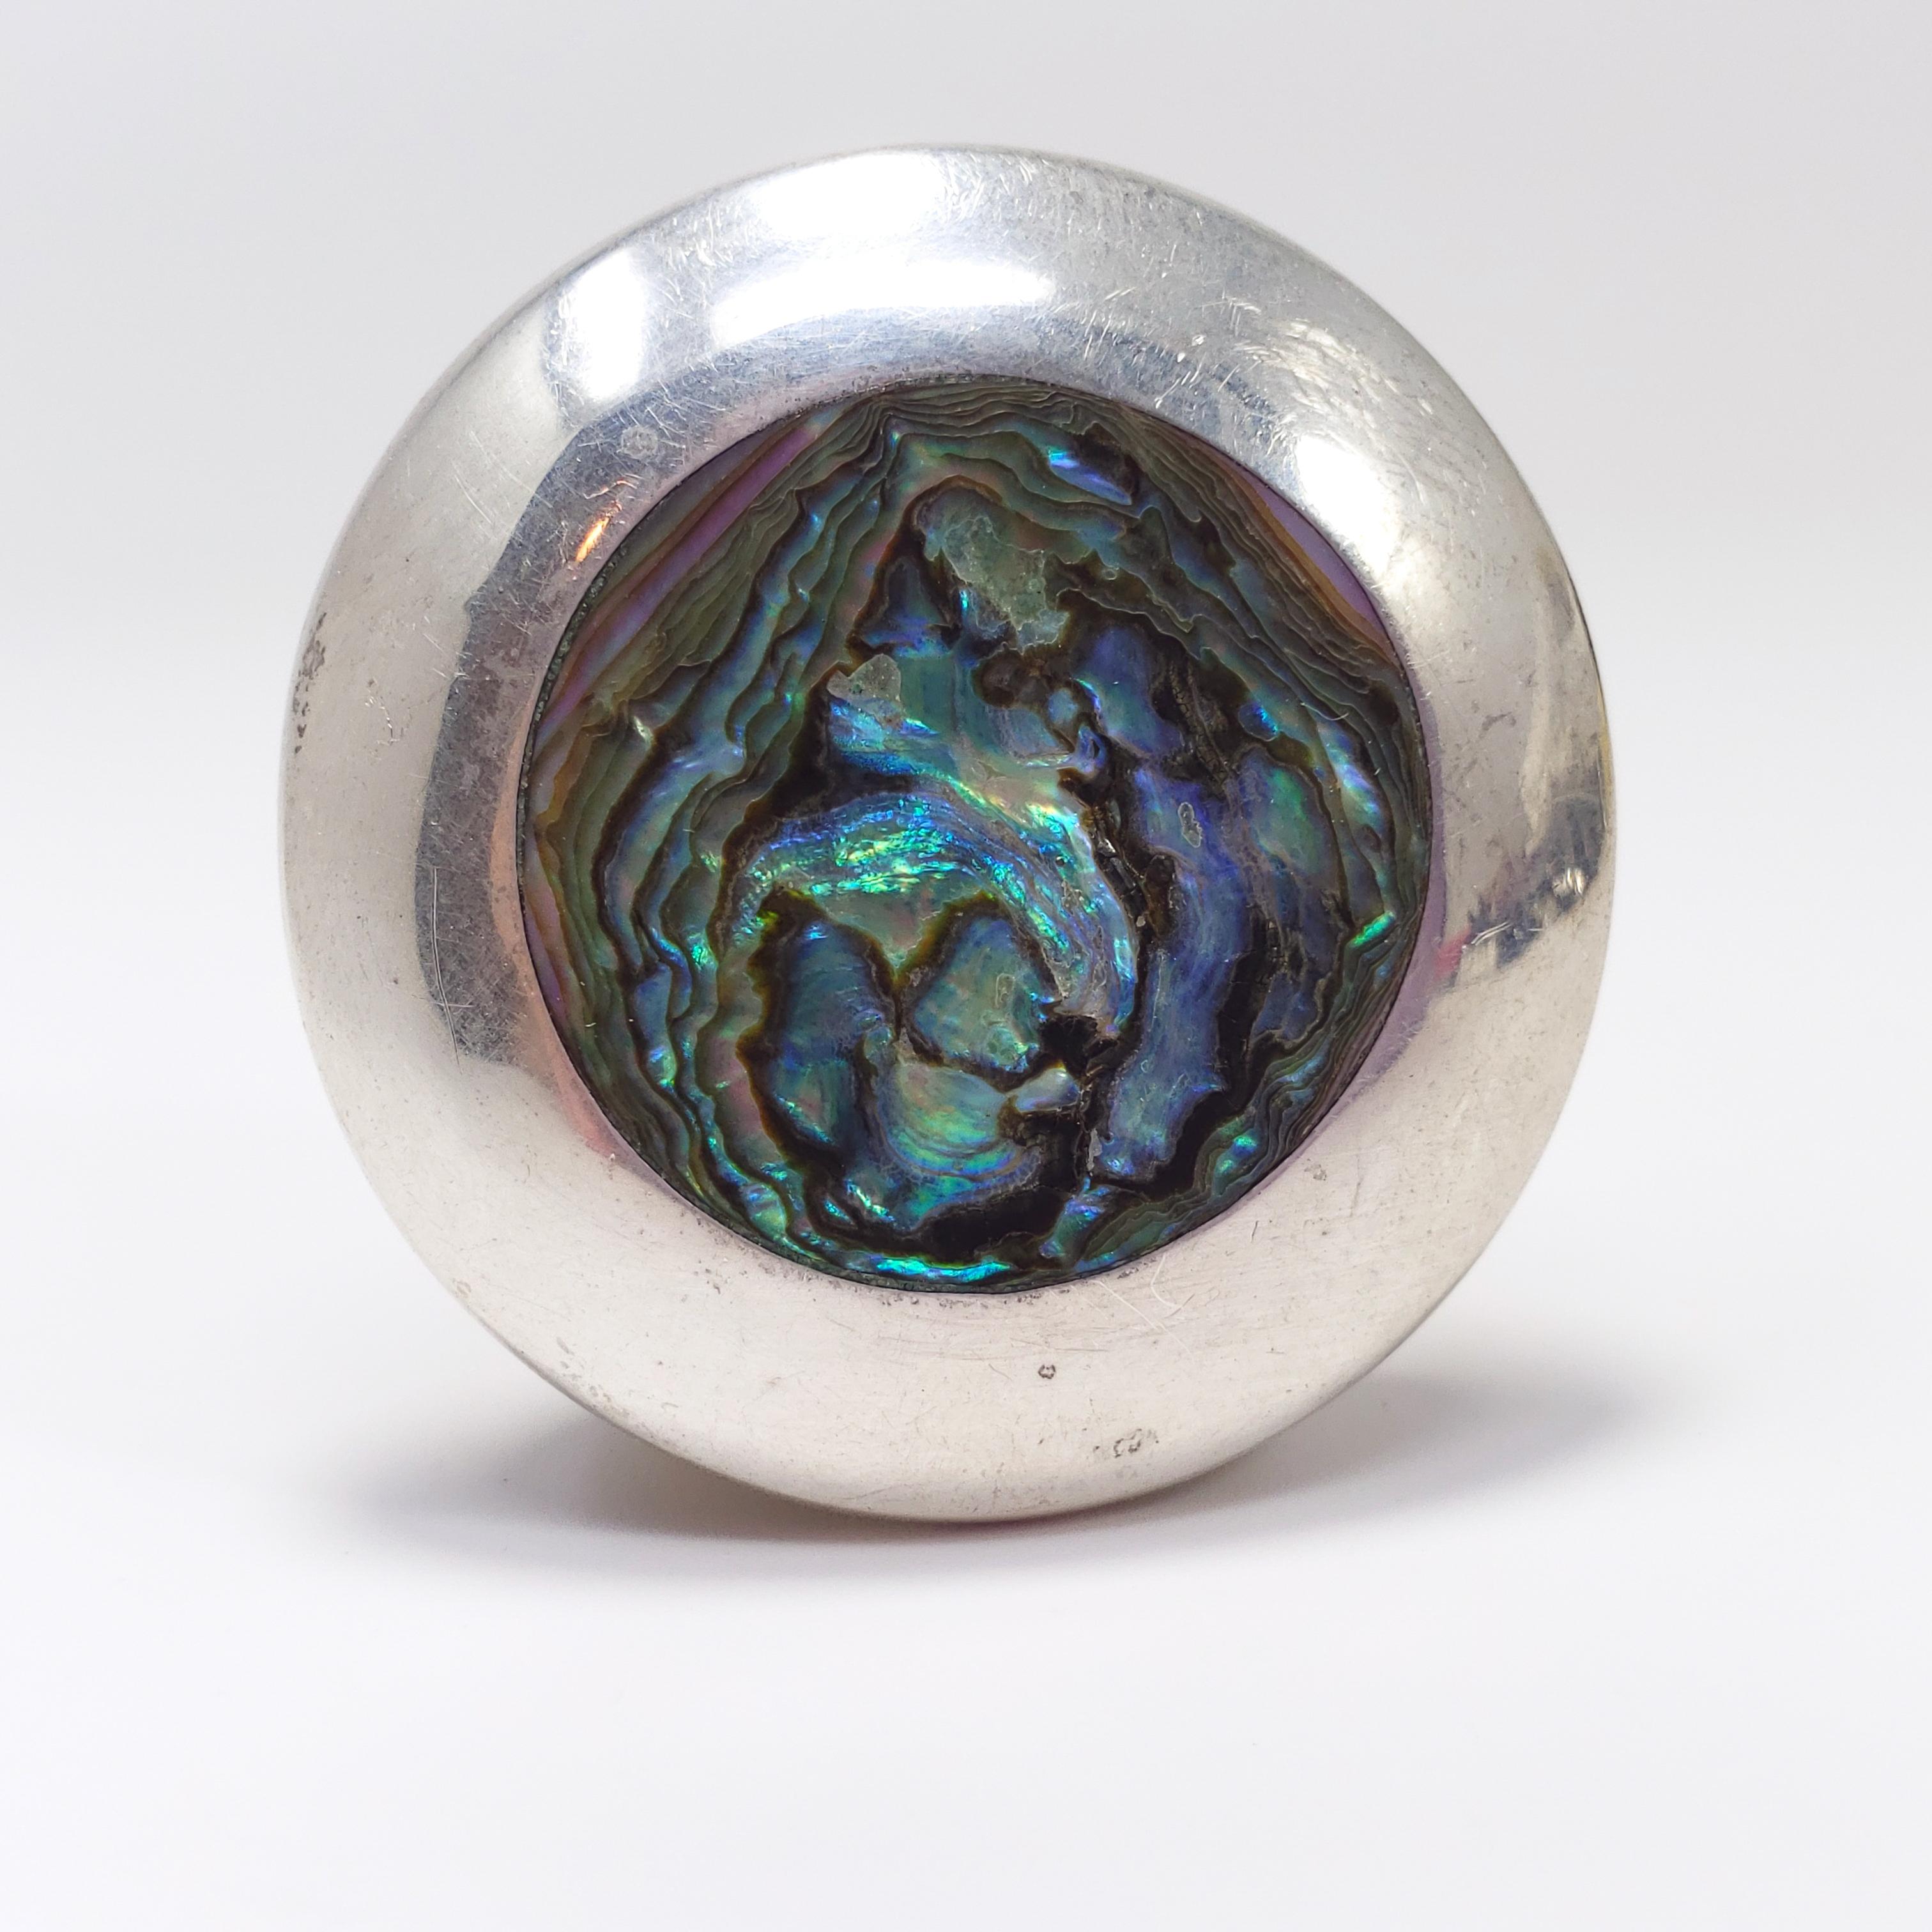 This accessory features an abalone shell inlay in a round sterling silver setting. Excellent Mexican silver craftsmanship. Can be used as either a necklace pendant or a pin/brooch.

Hallmarks: SFC, Mexico, 925
Weight: 8 g
Dimensions: L 3.8 x W 3.8 cm